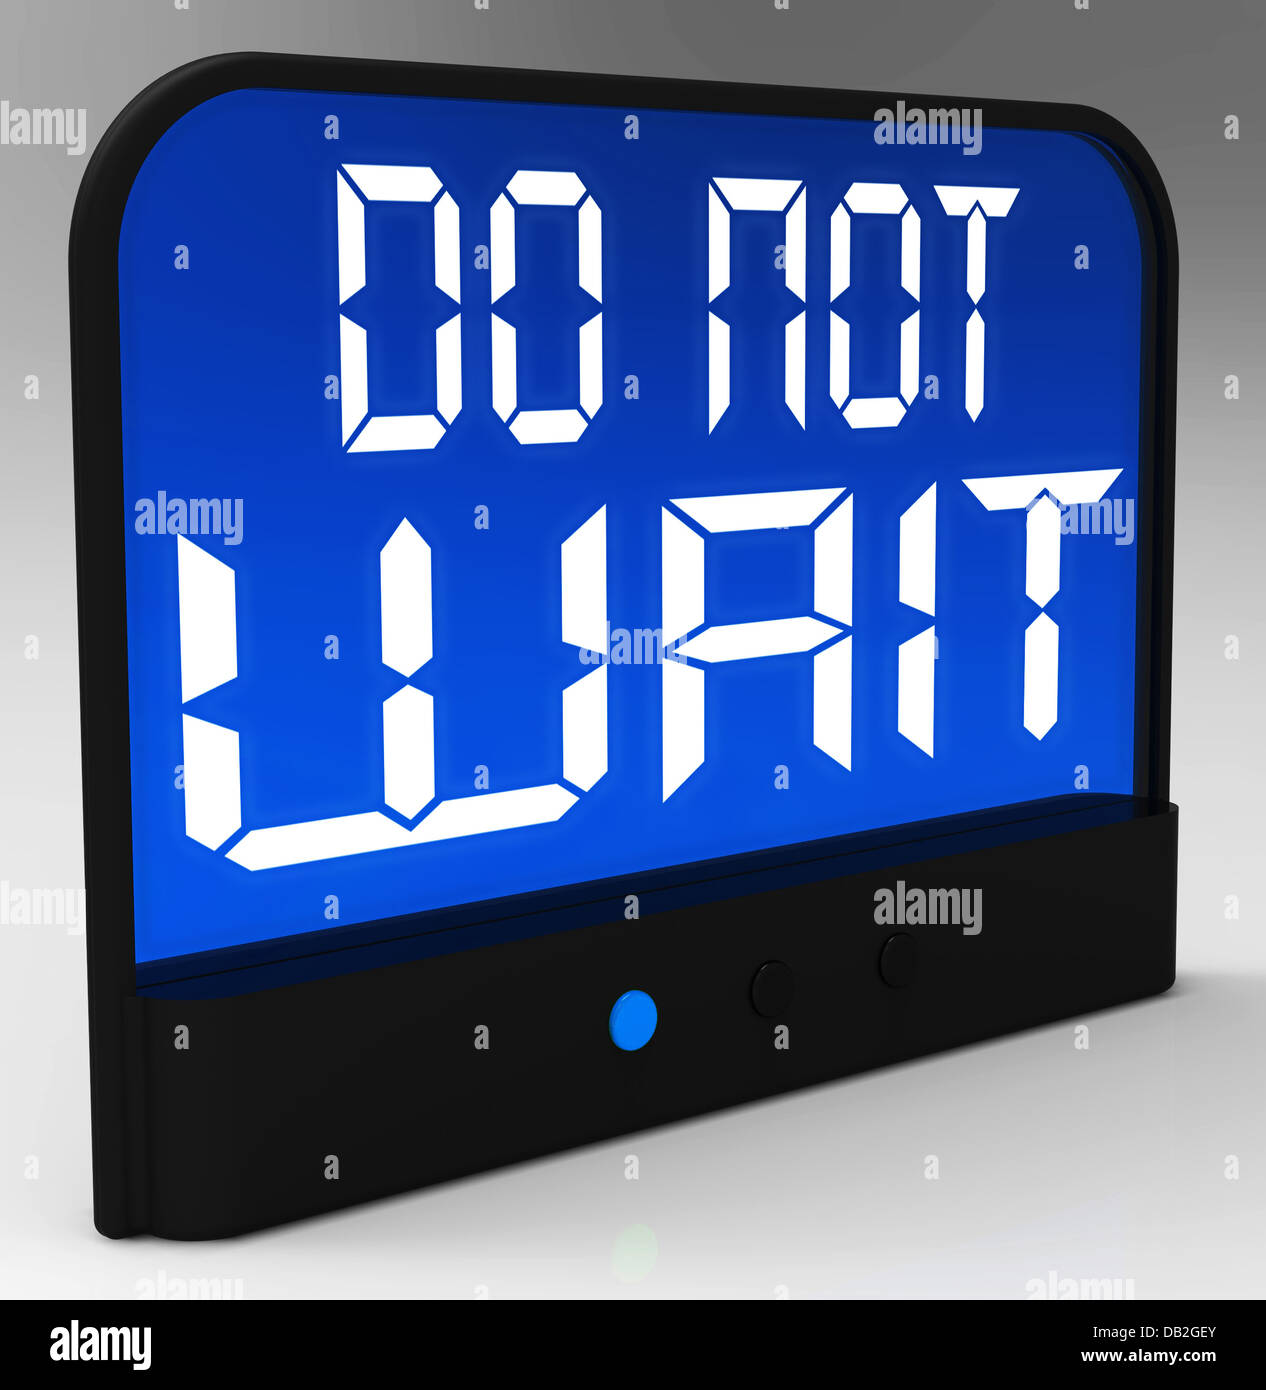 Do Not Wait Clock Shows Urgency For Action Stock Photo